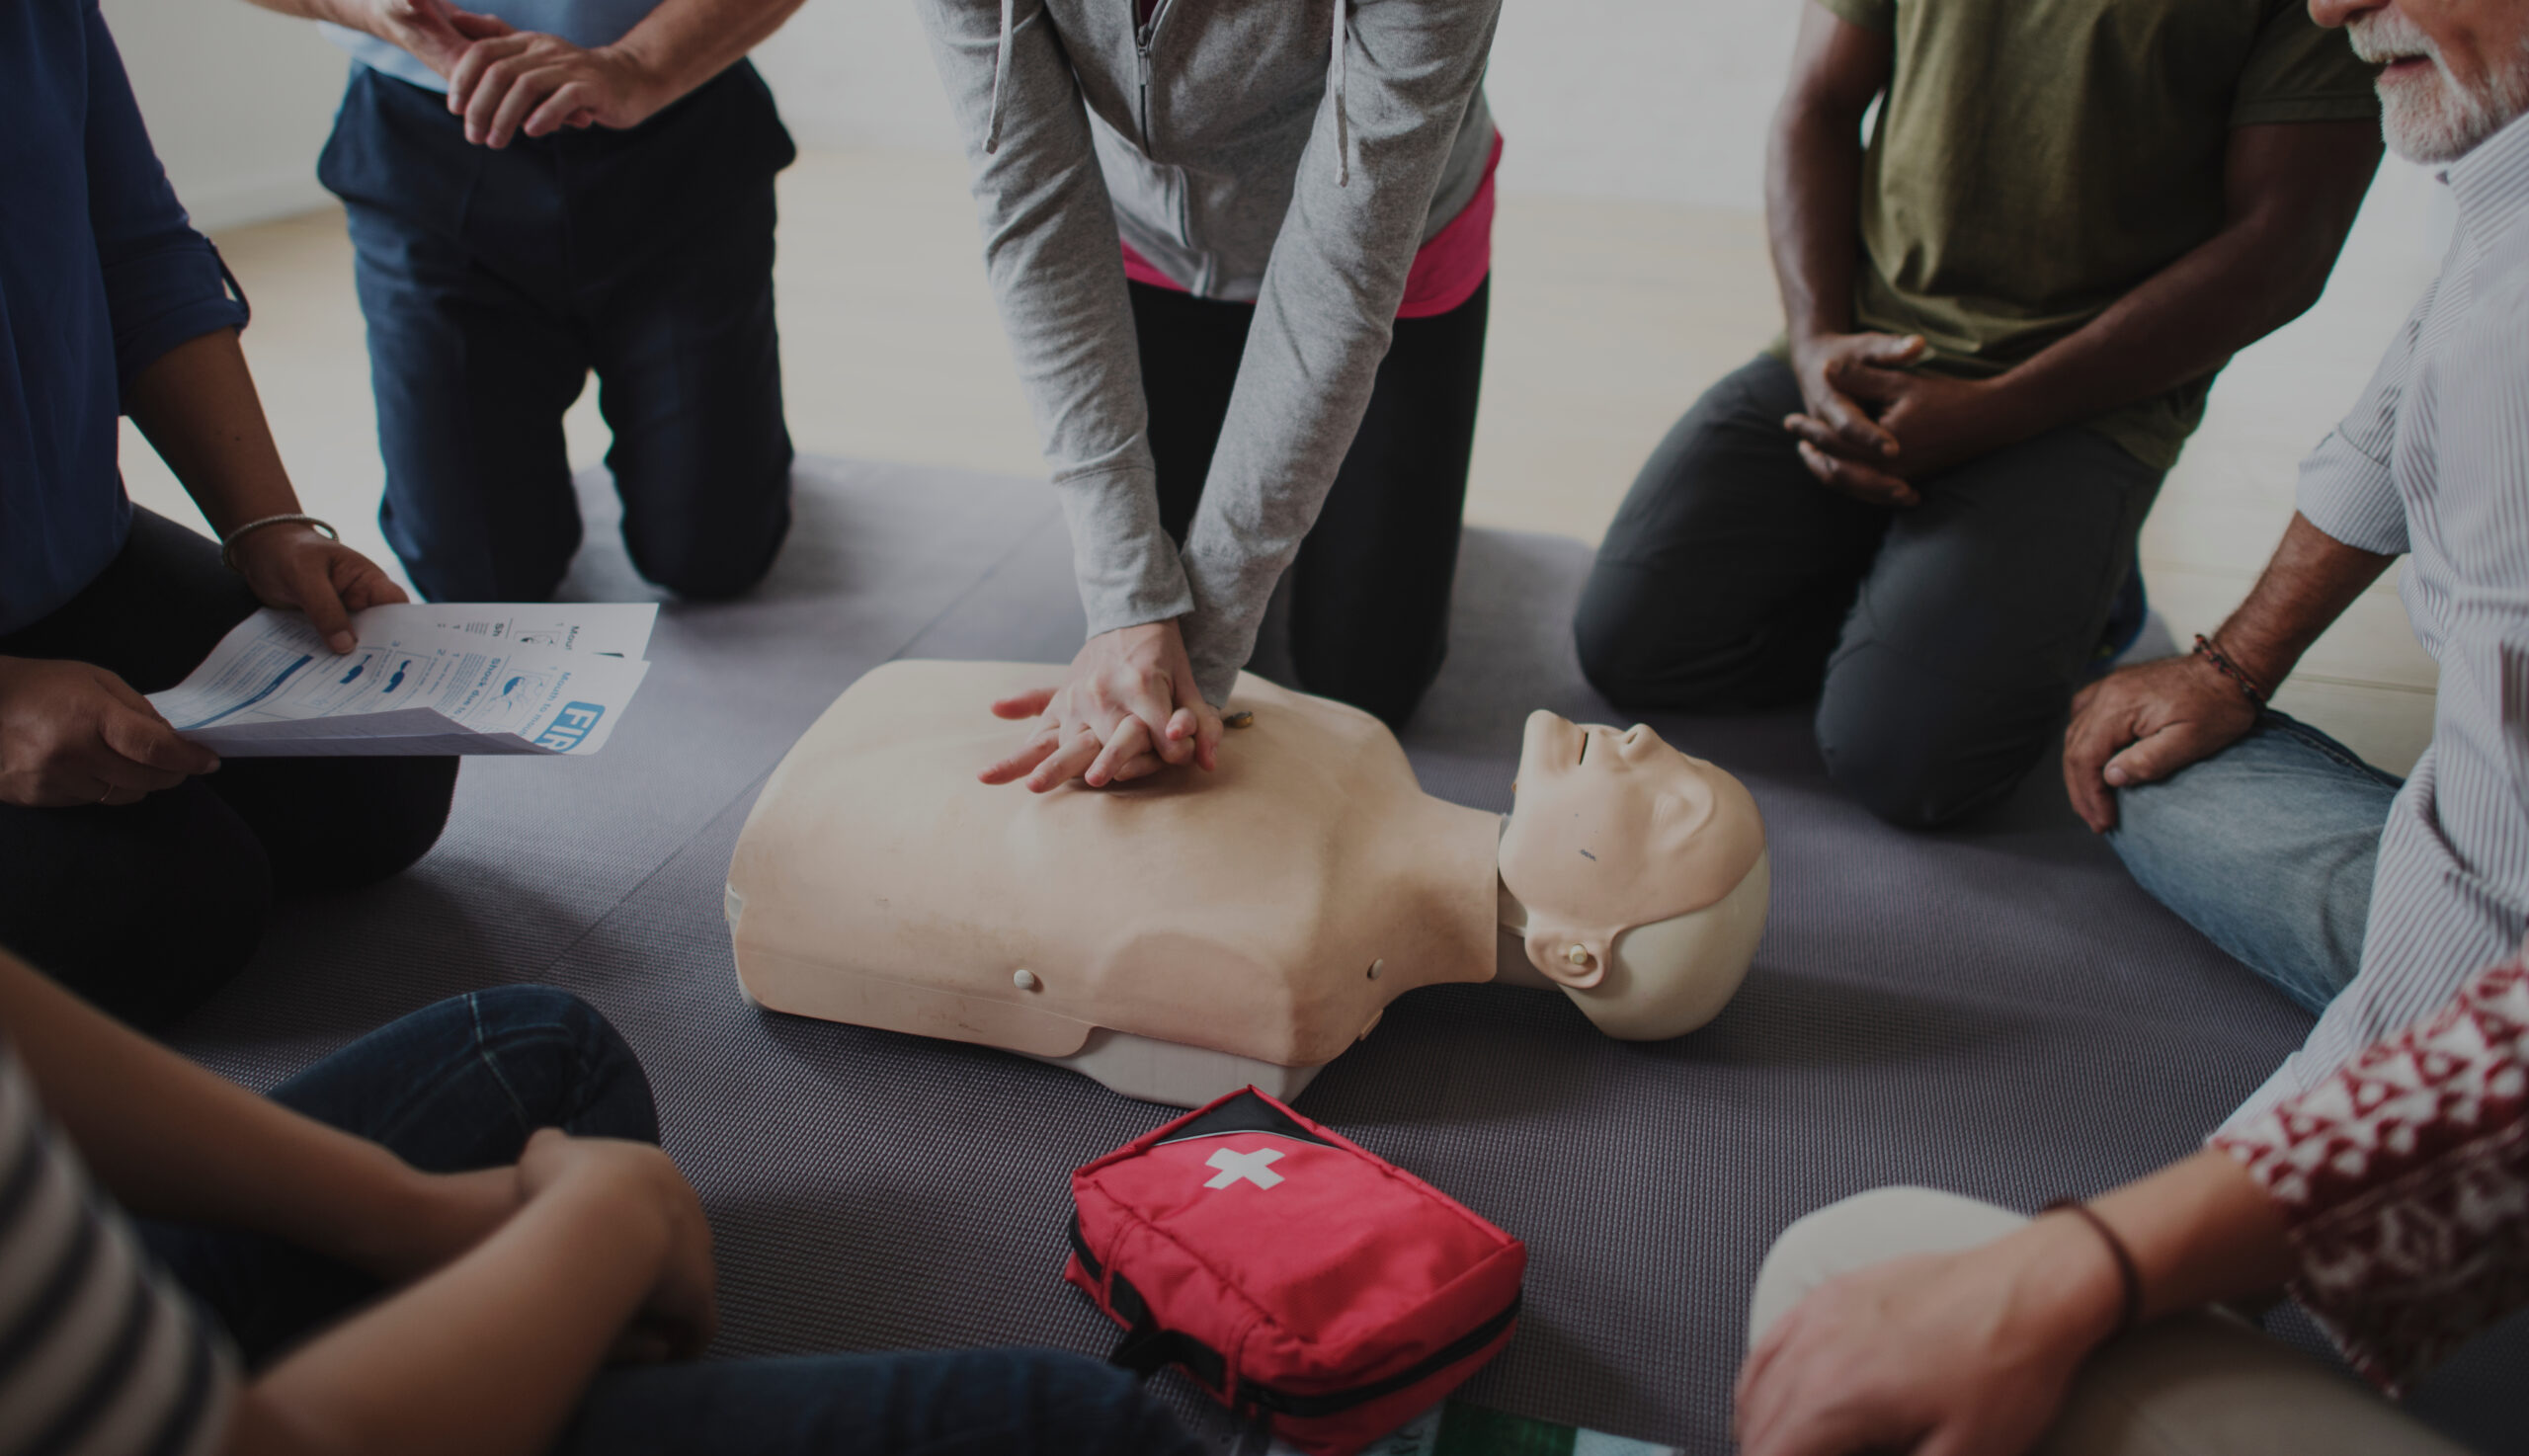 CPR First Aid Training Course